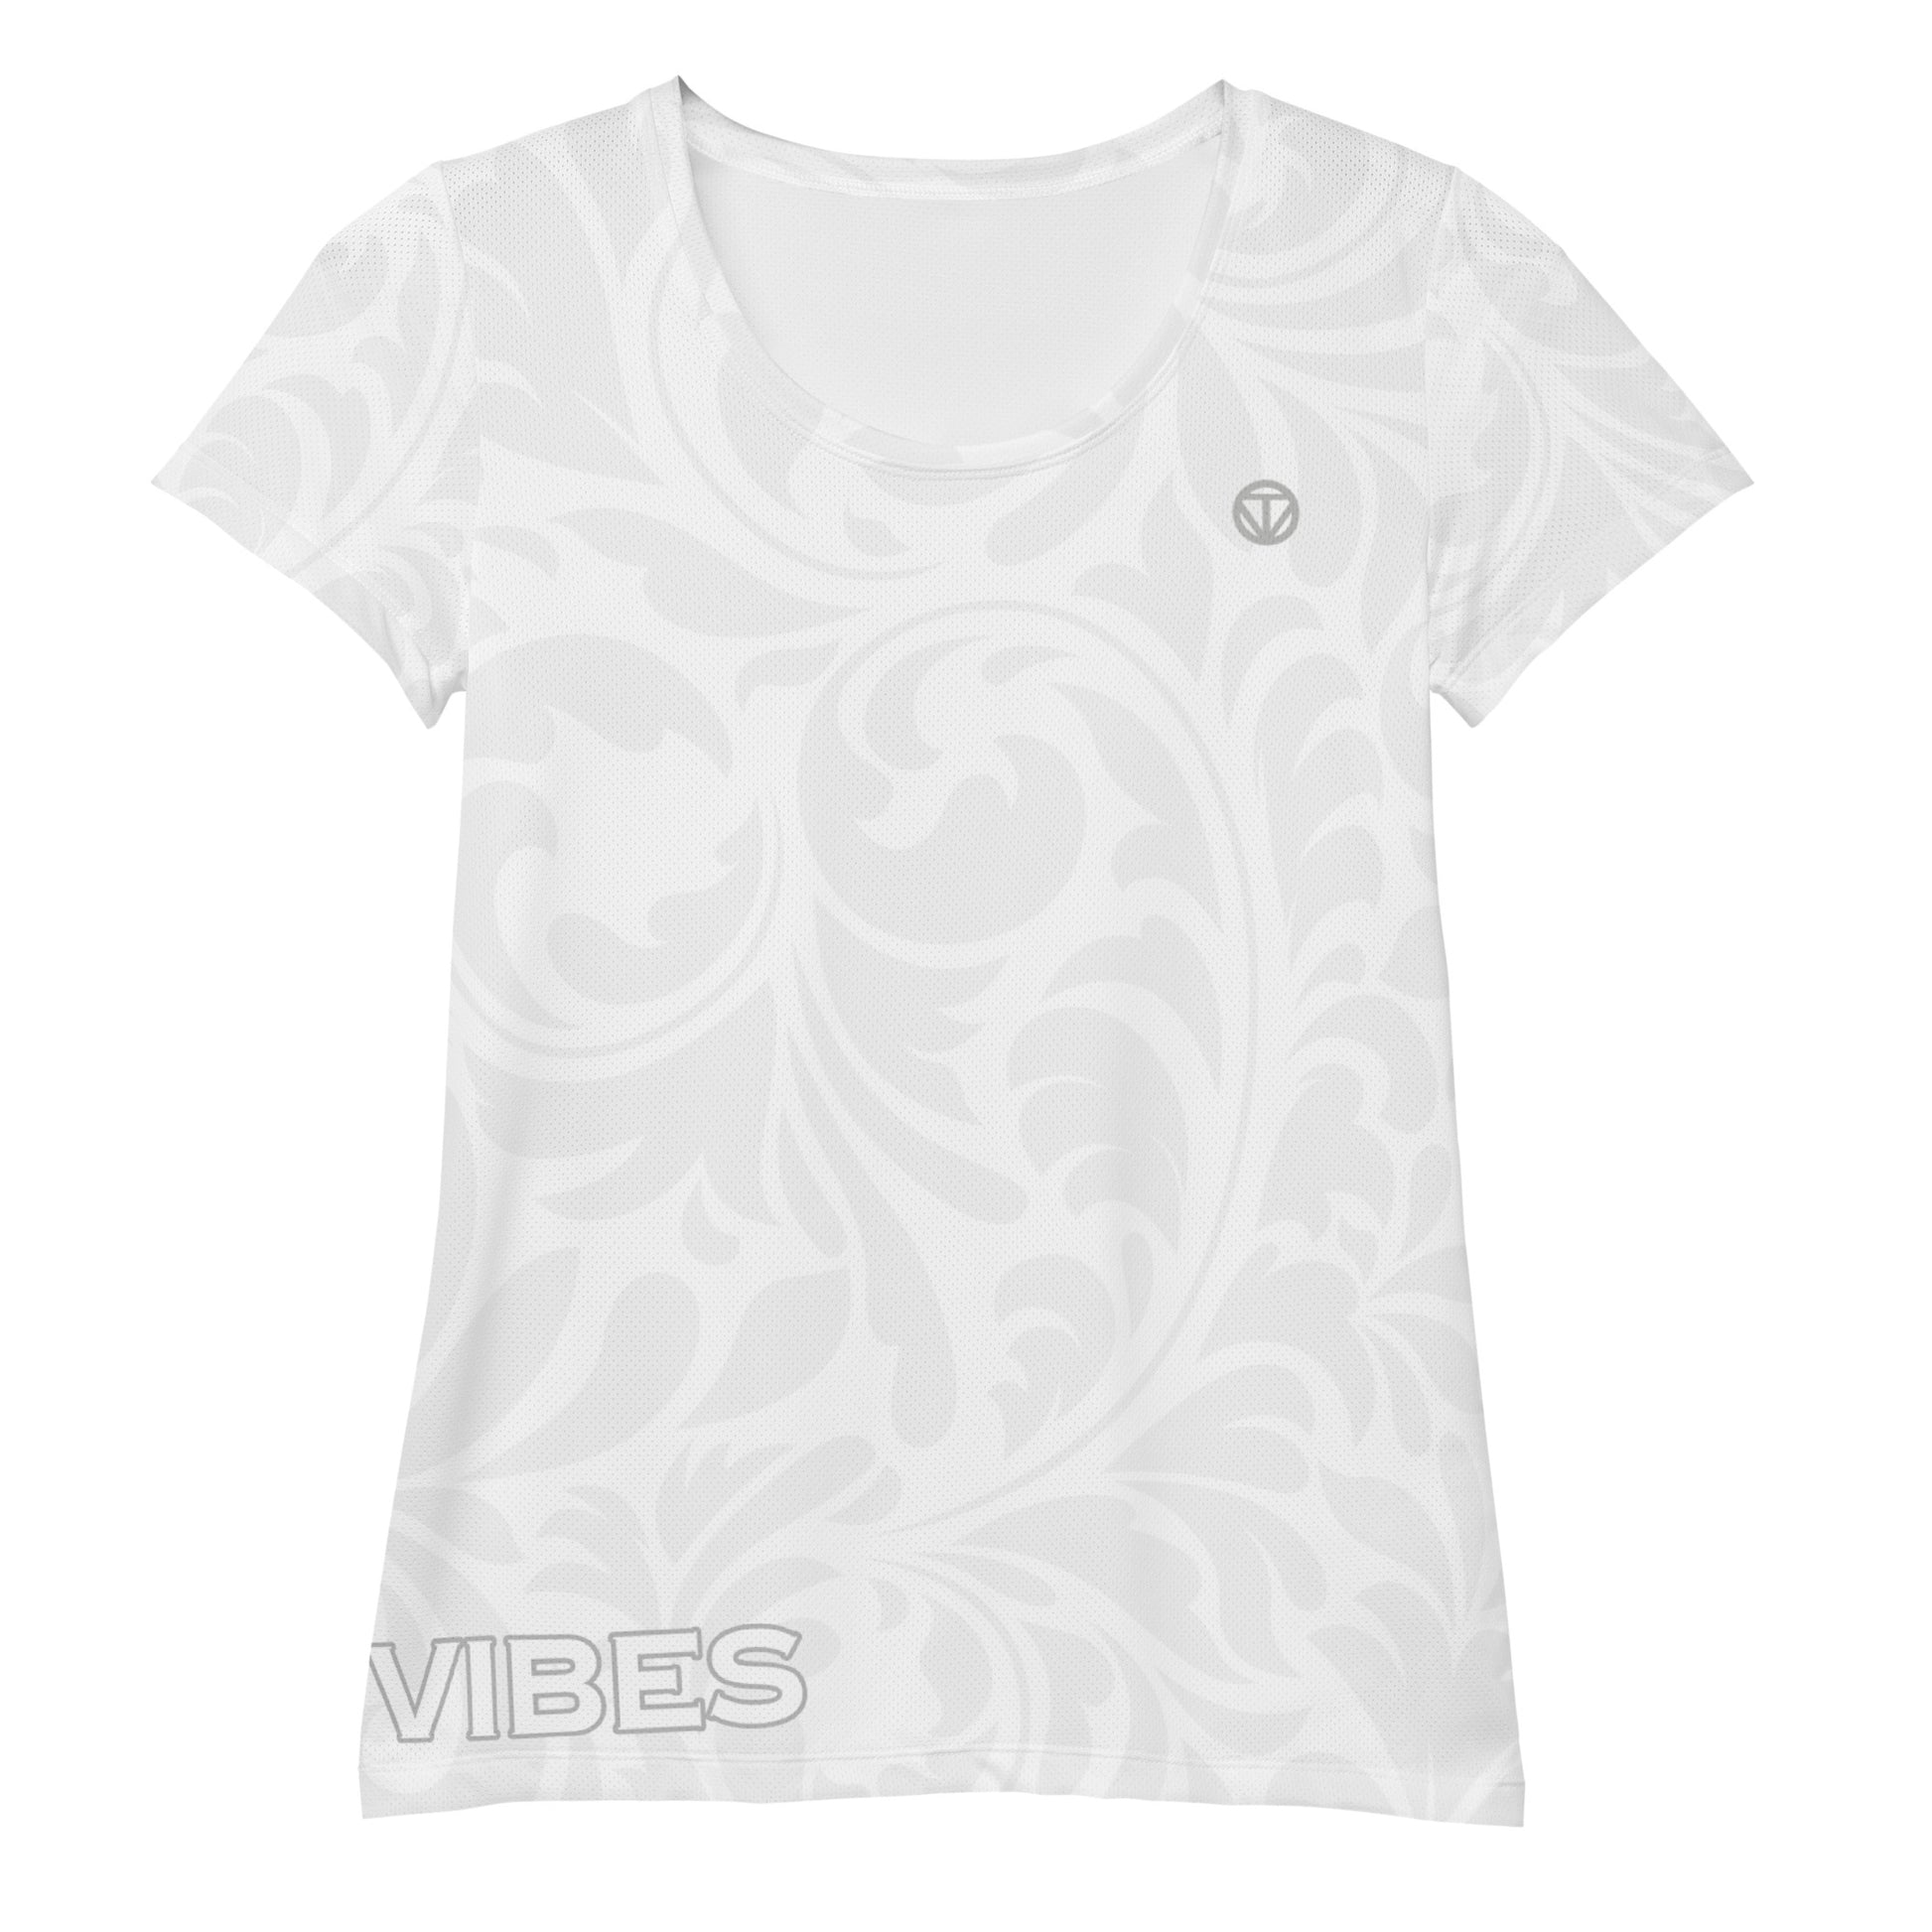 TIME OF VIBES - Women's Athletic T-shirt FLORAL (White) - €45.00